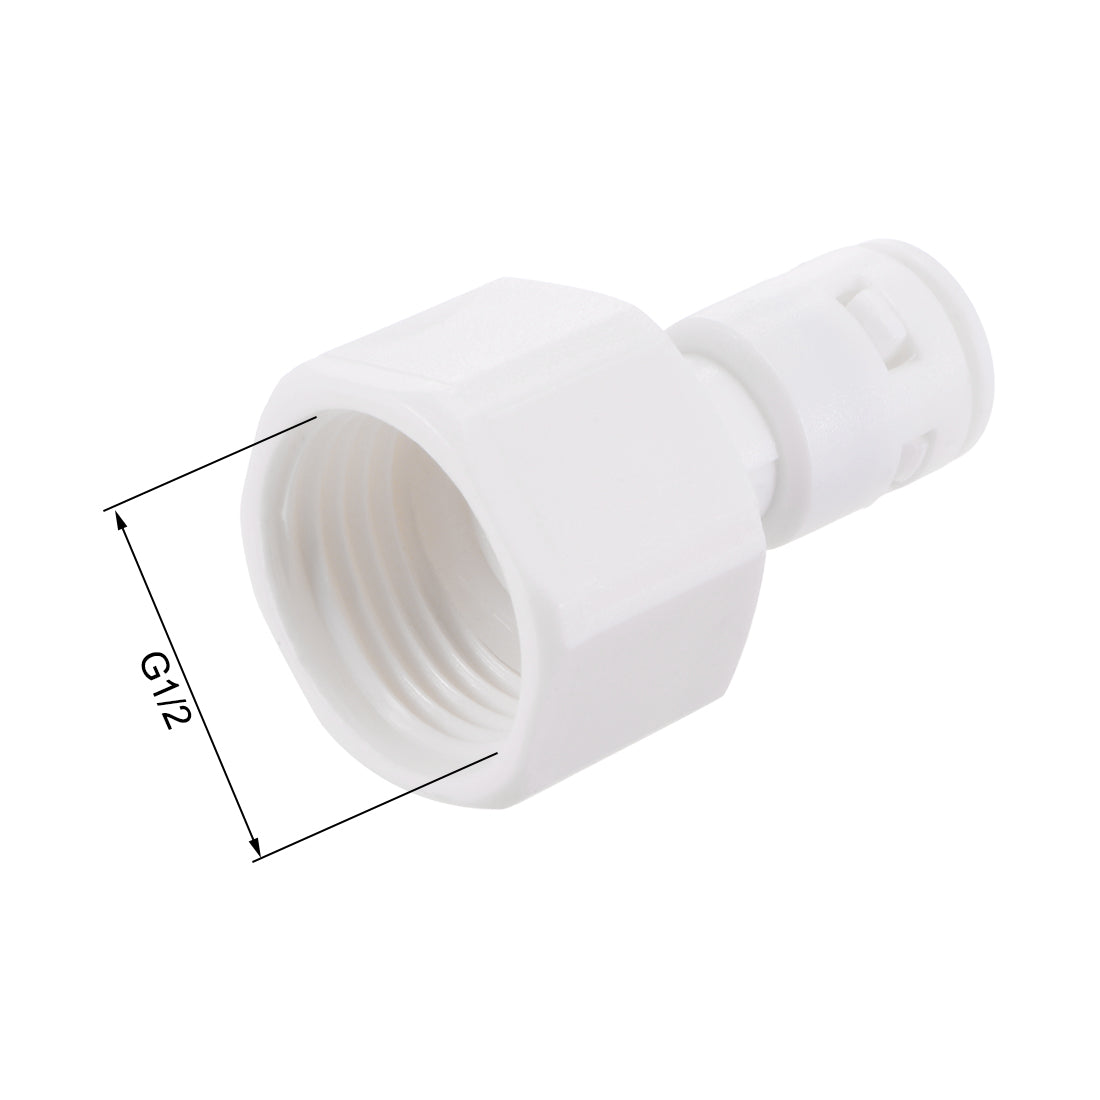 uxcell Uxcell Quick Connector G1/2 Female Thread to 1/4" Tube, Straight Connect Fittings for Water Purifier, 40mm White 5Pcs